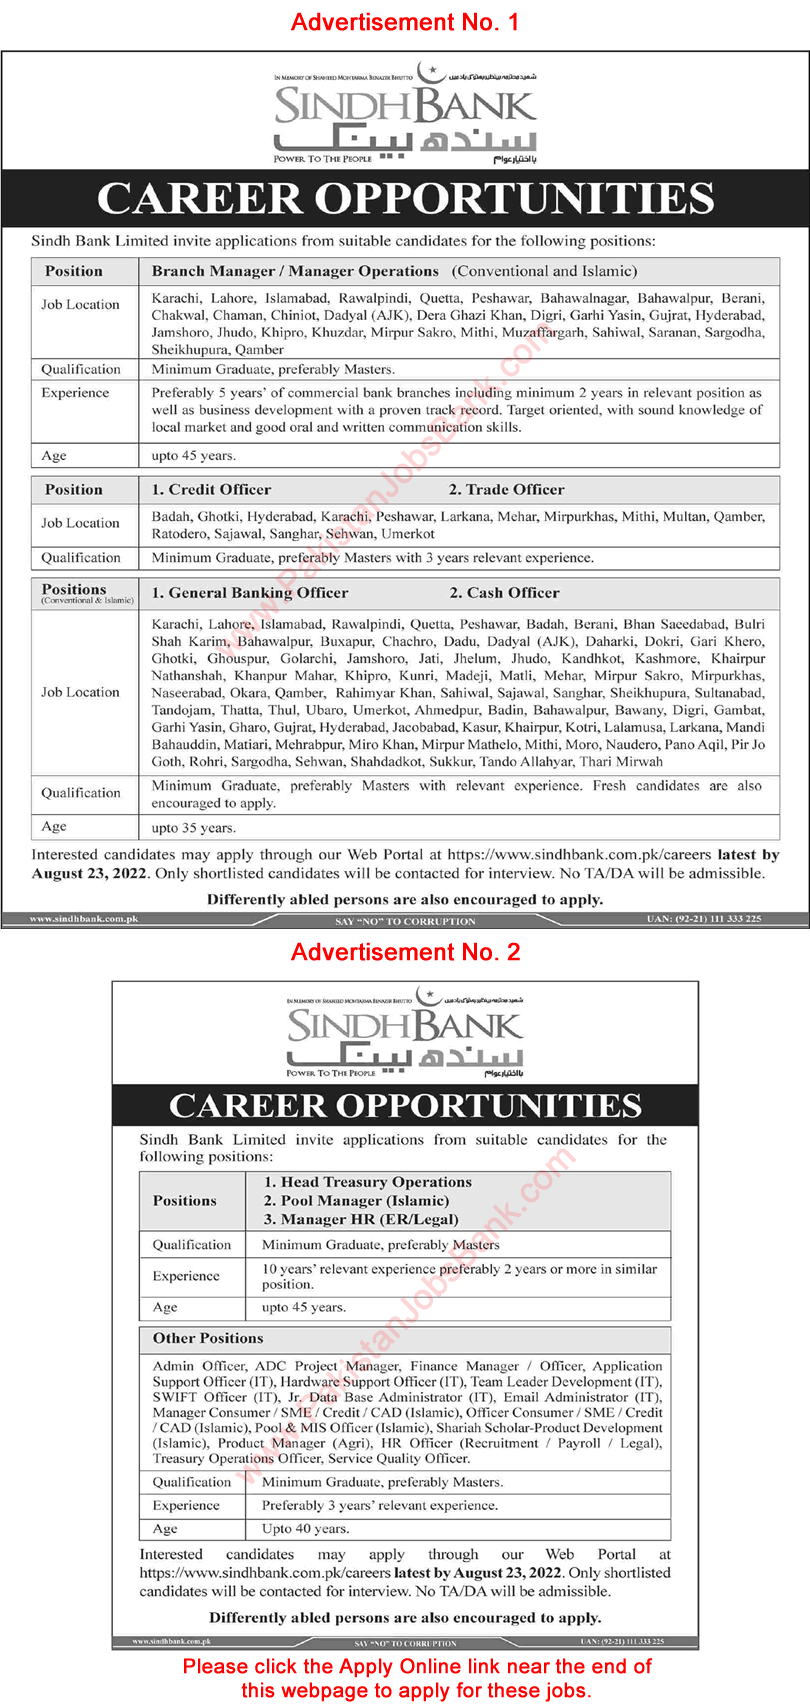 Sindh Bank Jobs August 2022 Apply Online General Banking Officers, Cash Officers & Others Latest